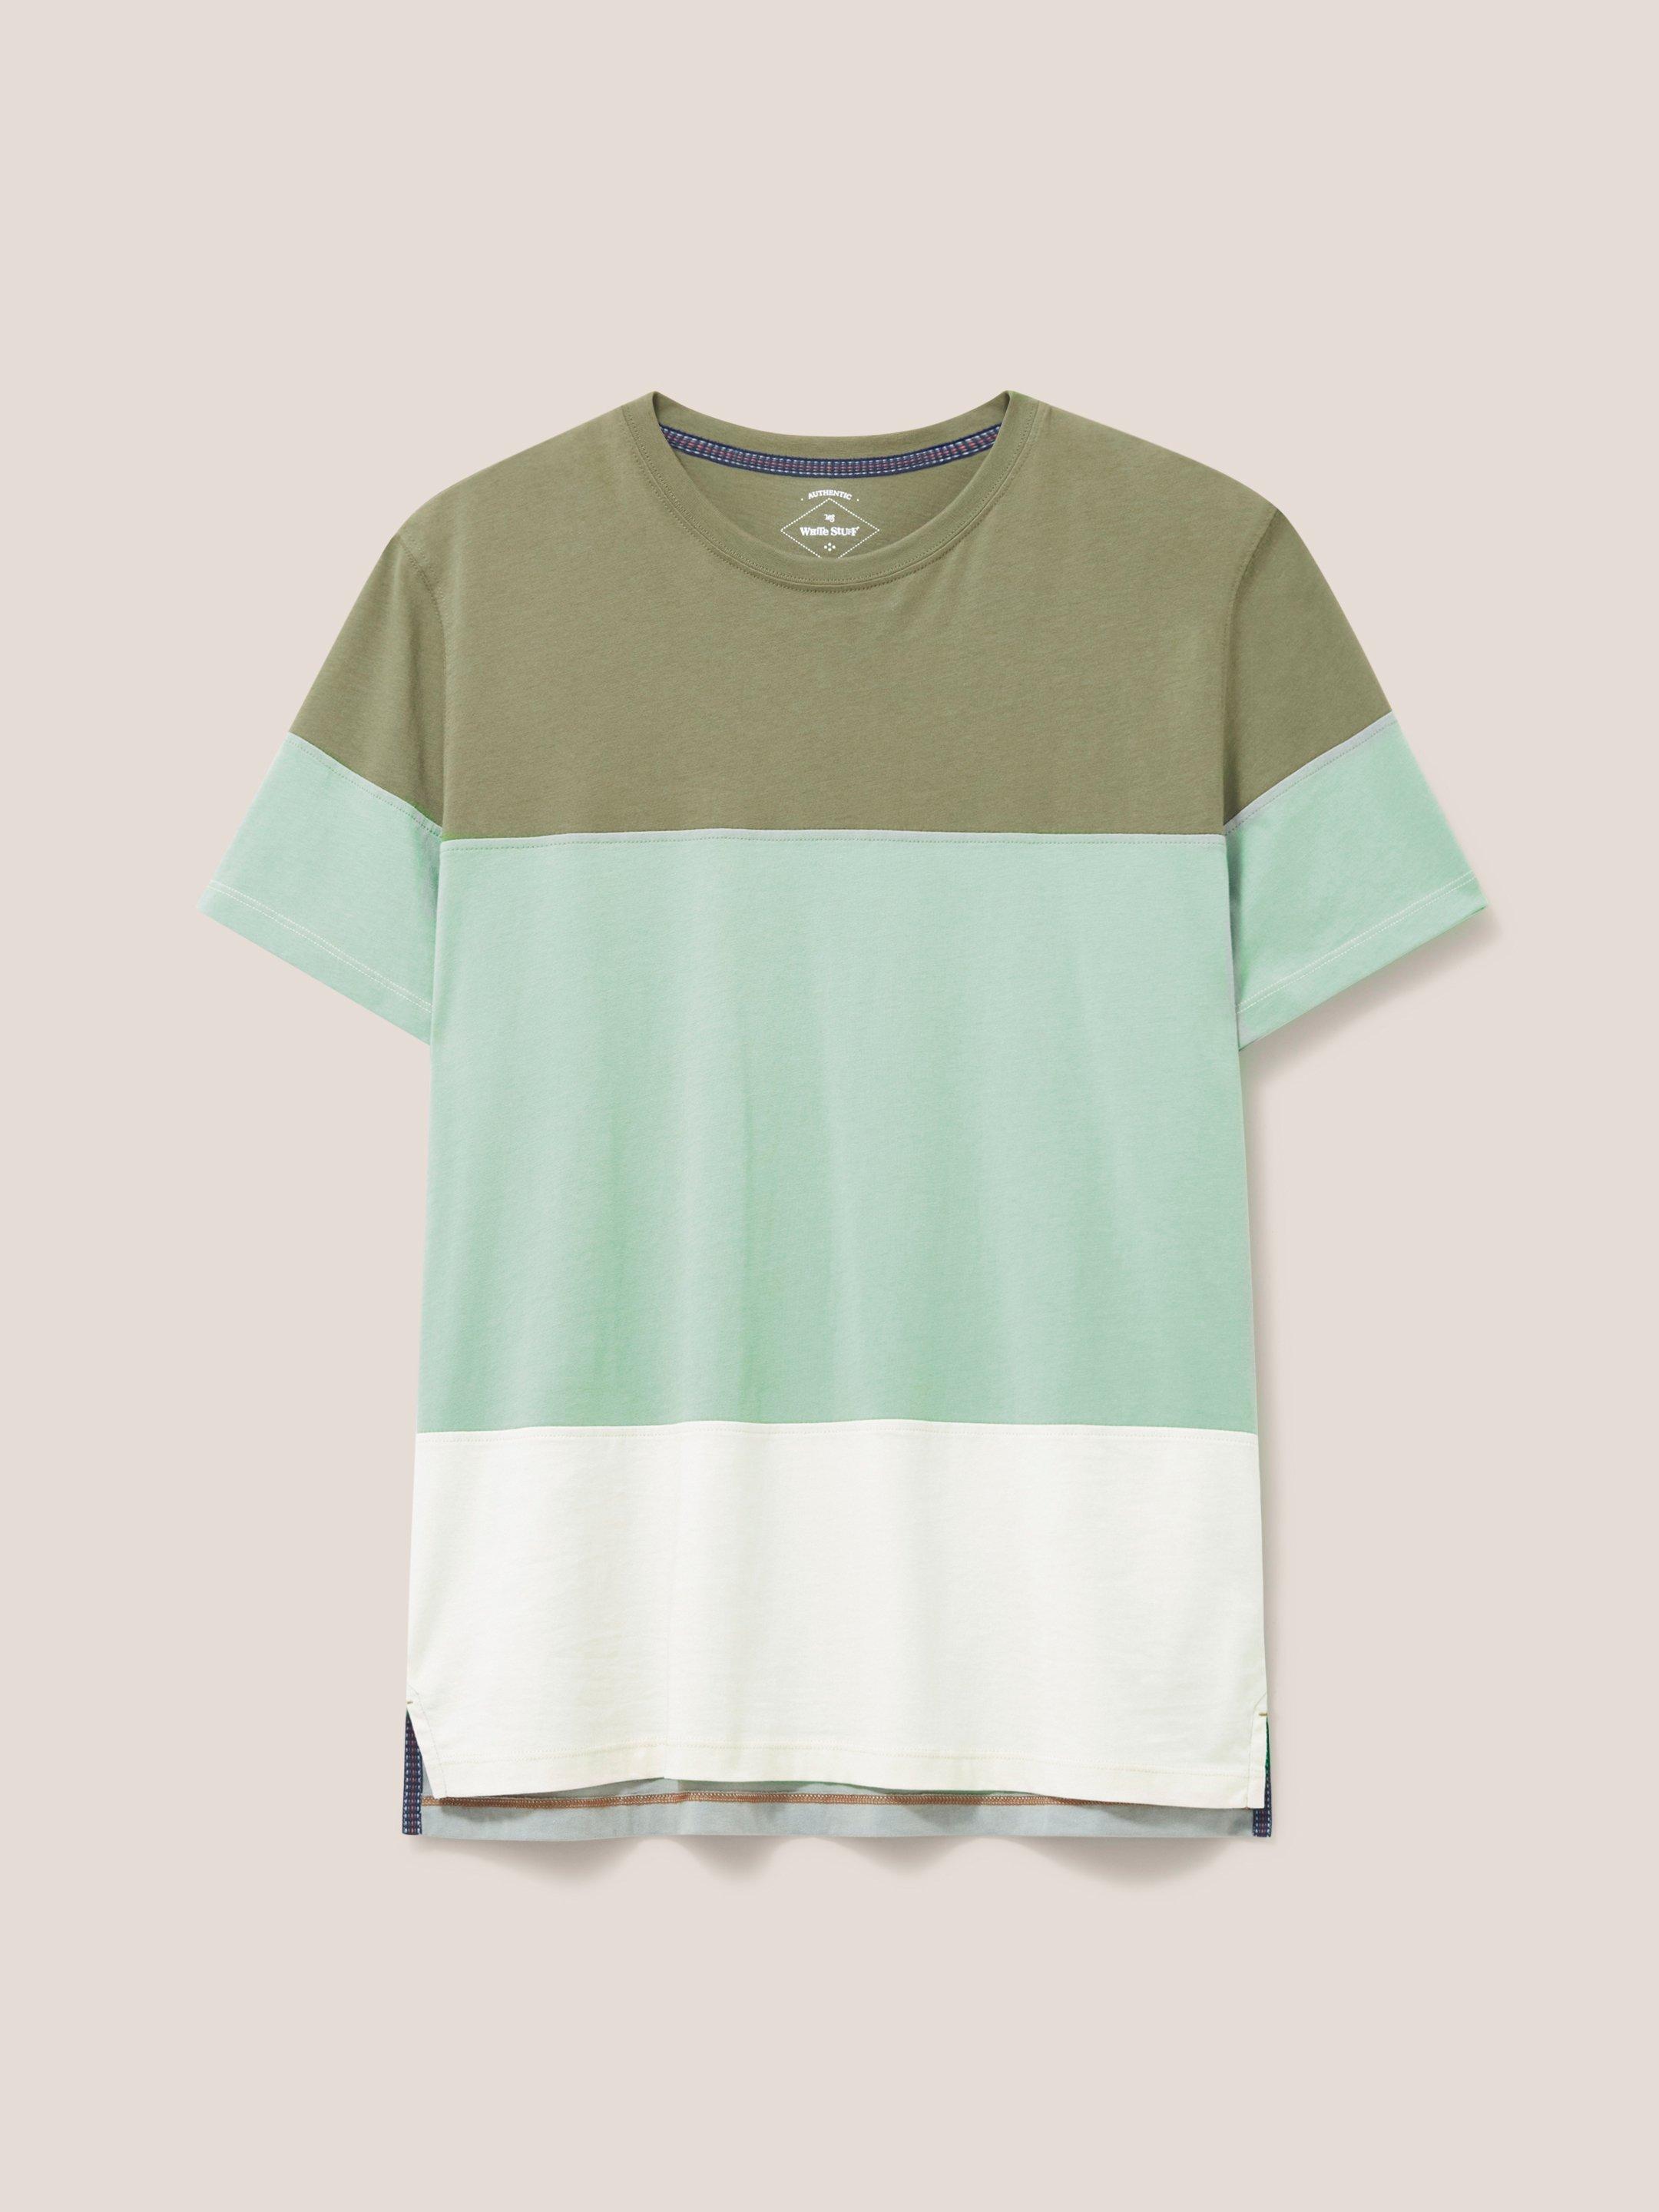 Linwood Colourblock SS Tee in DUS GREEN - FLAT FRONT